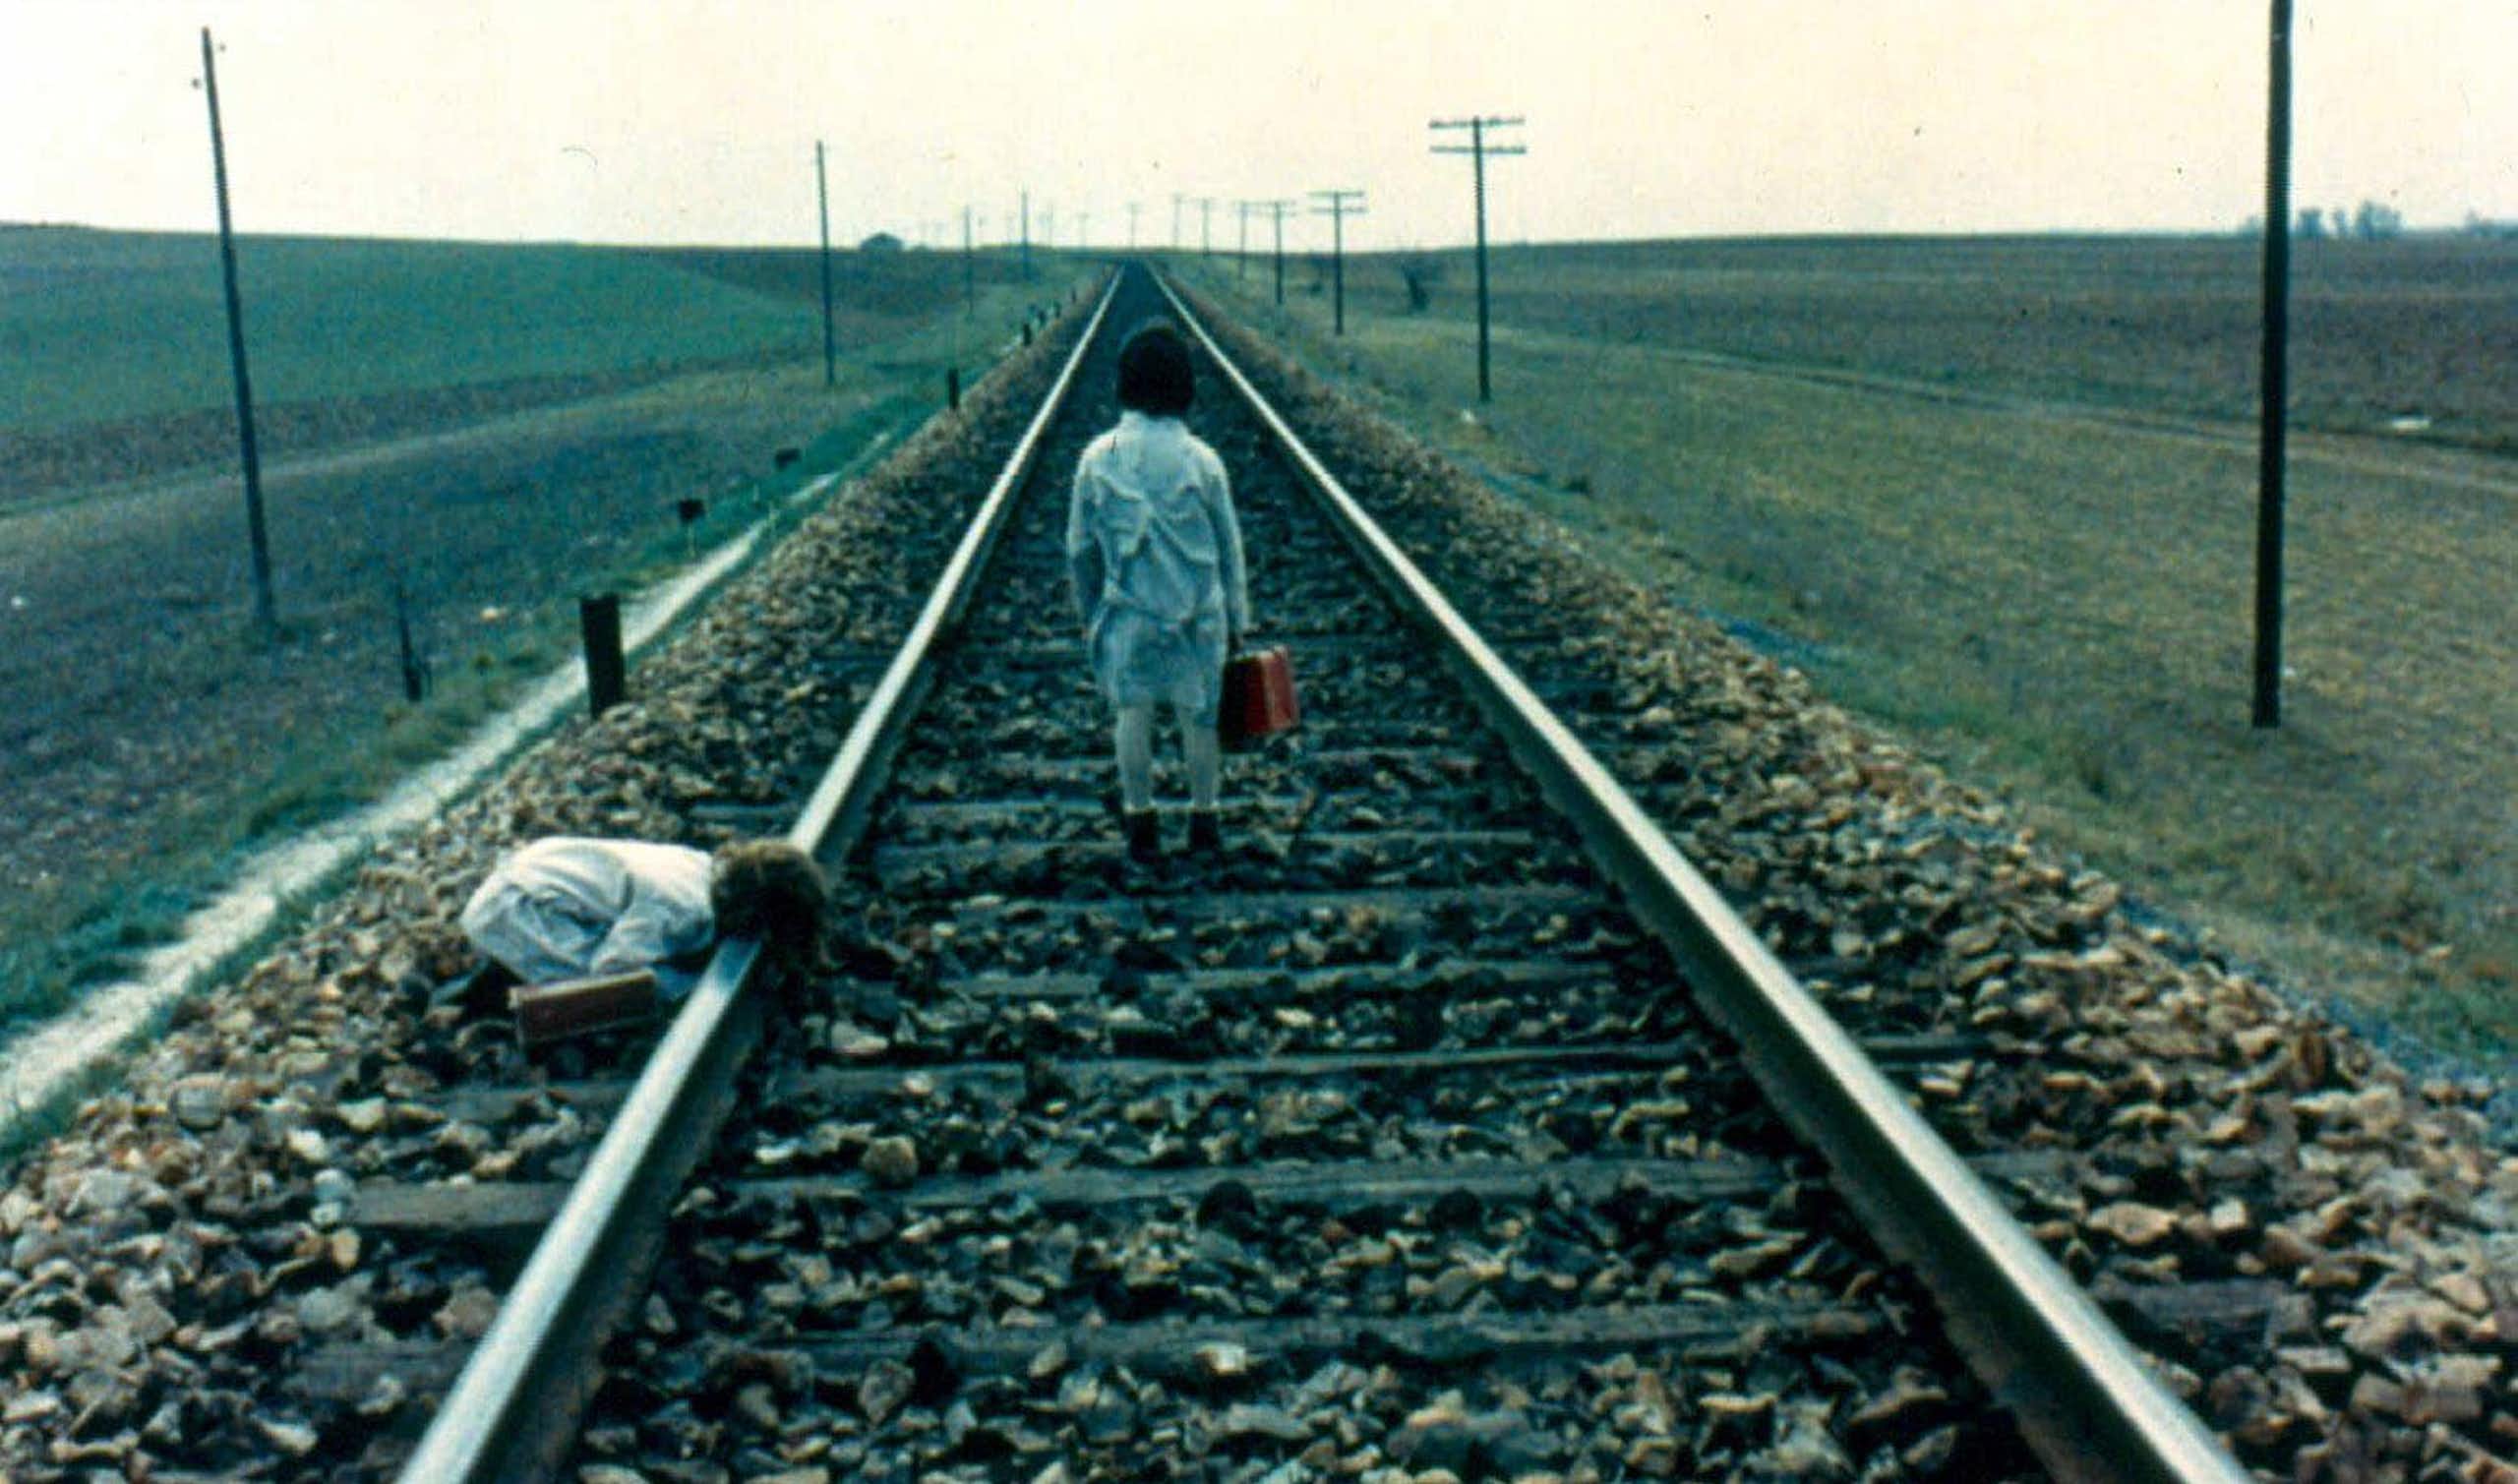 Two girls walk by a train track.